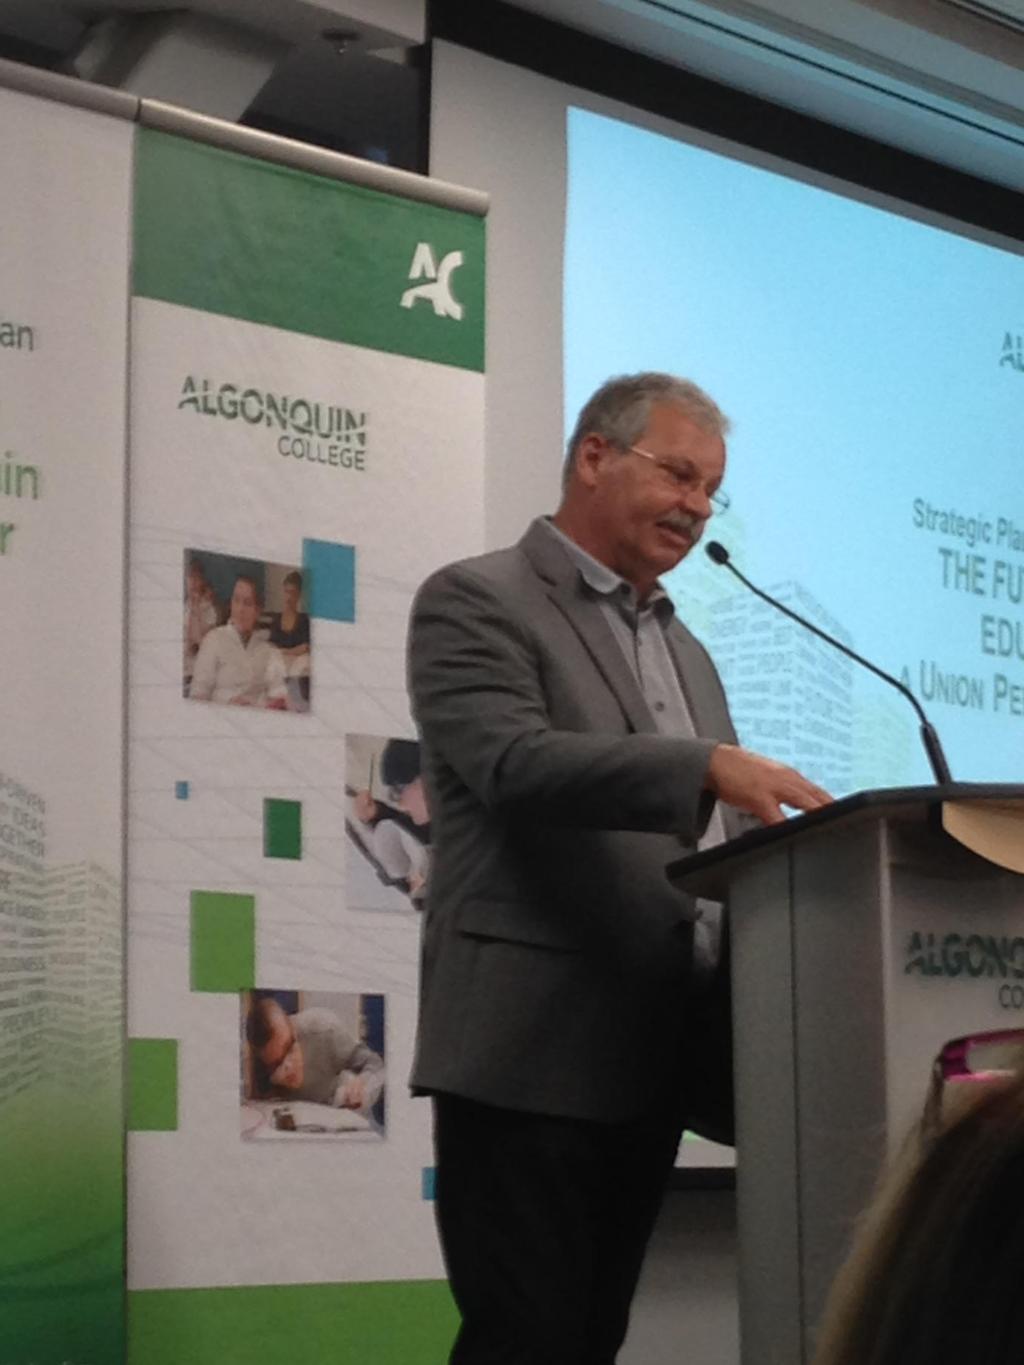 OPSEU President Warren (Smokey) Thomas gives a presentation on the future of education to Algonquin College, May 21.